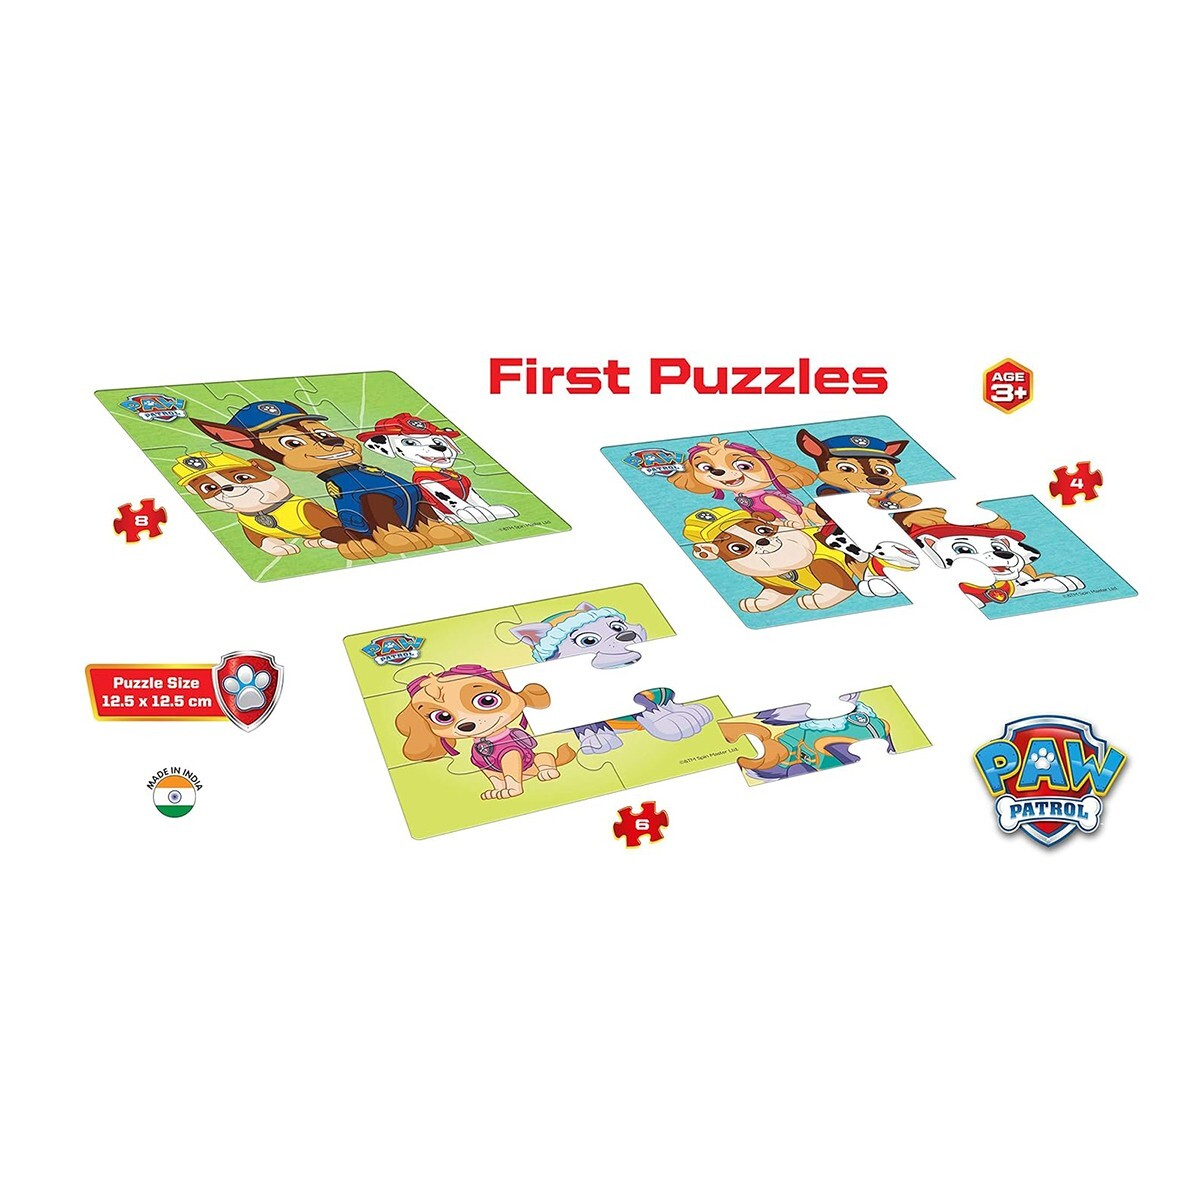 Frank Paw Patrol First Puzzles 70301